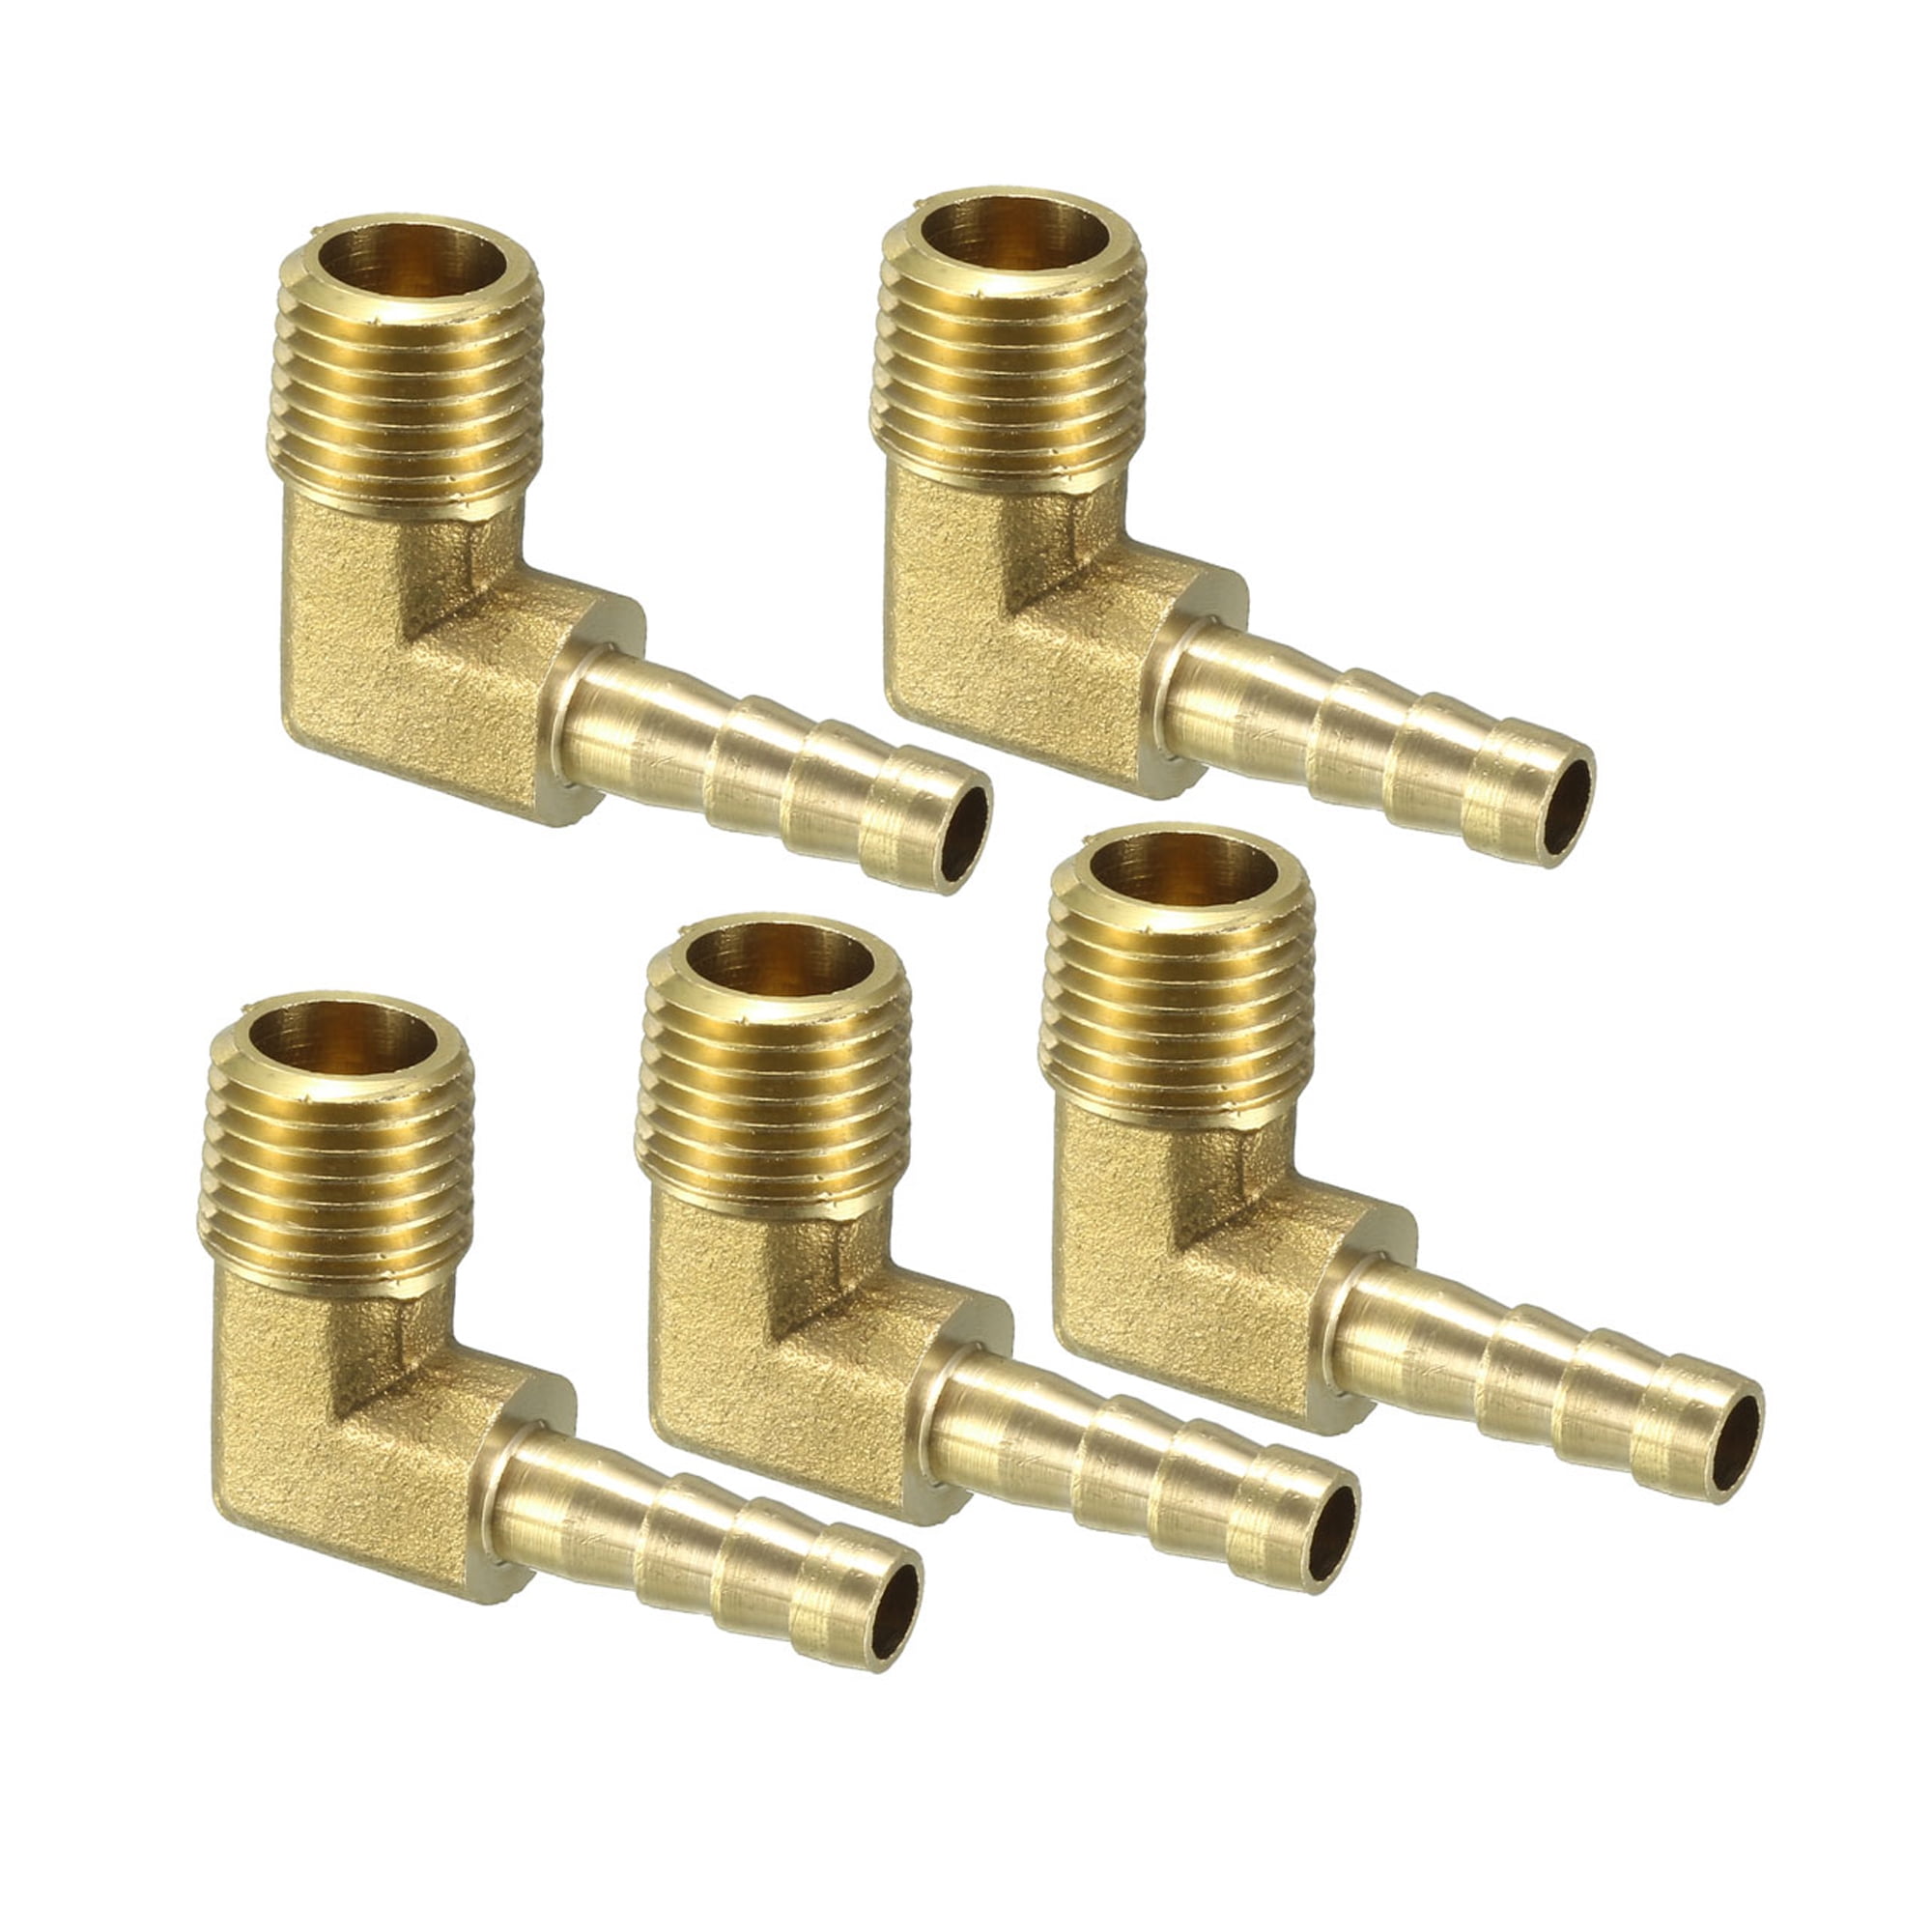 uxcell Brass Hose Barb Fitting,Connector,8mm Barb x G 1/2 Female Pipe Adapter,5pcs 